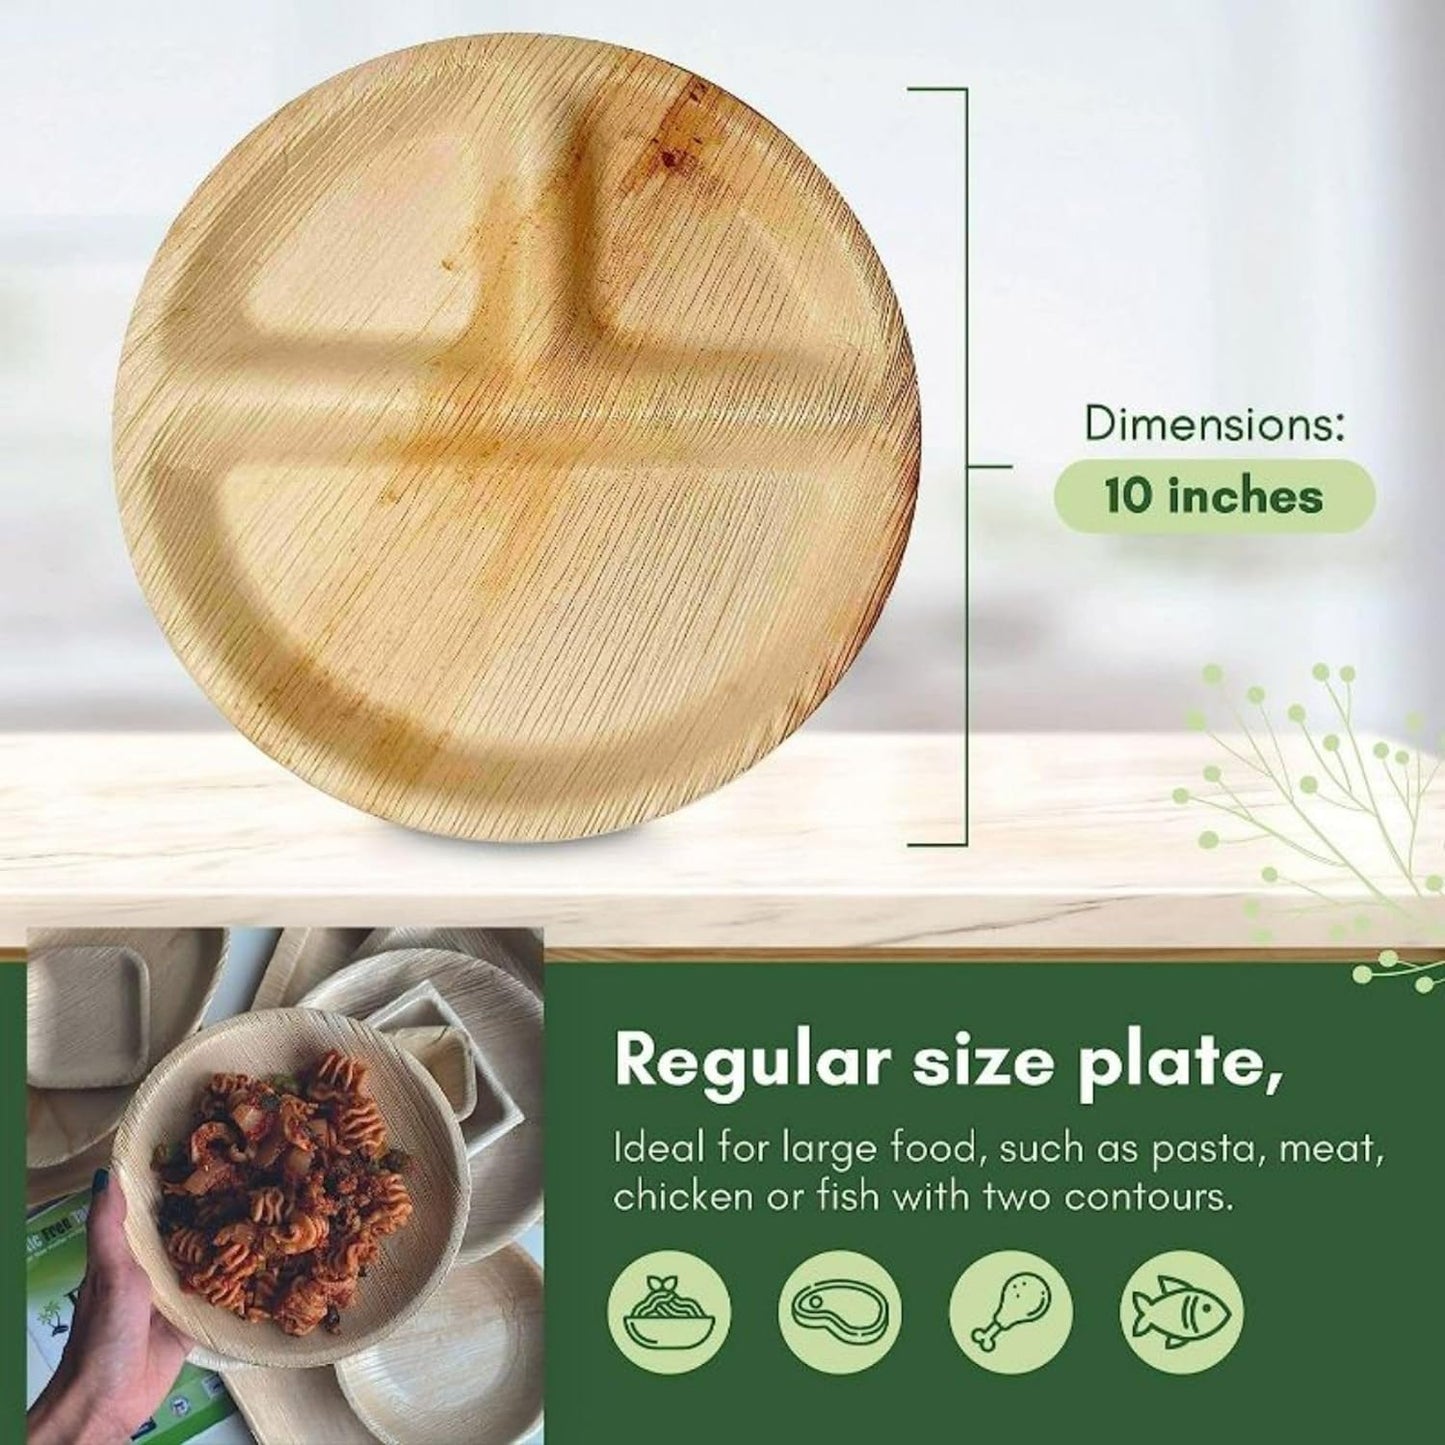 50 Palm Leaf 10" Round Compartment Party Plates